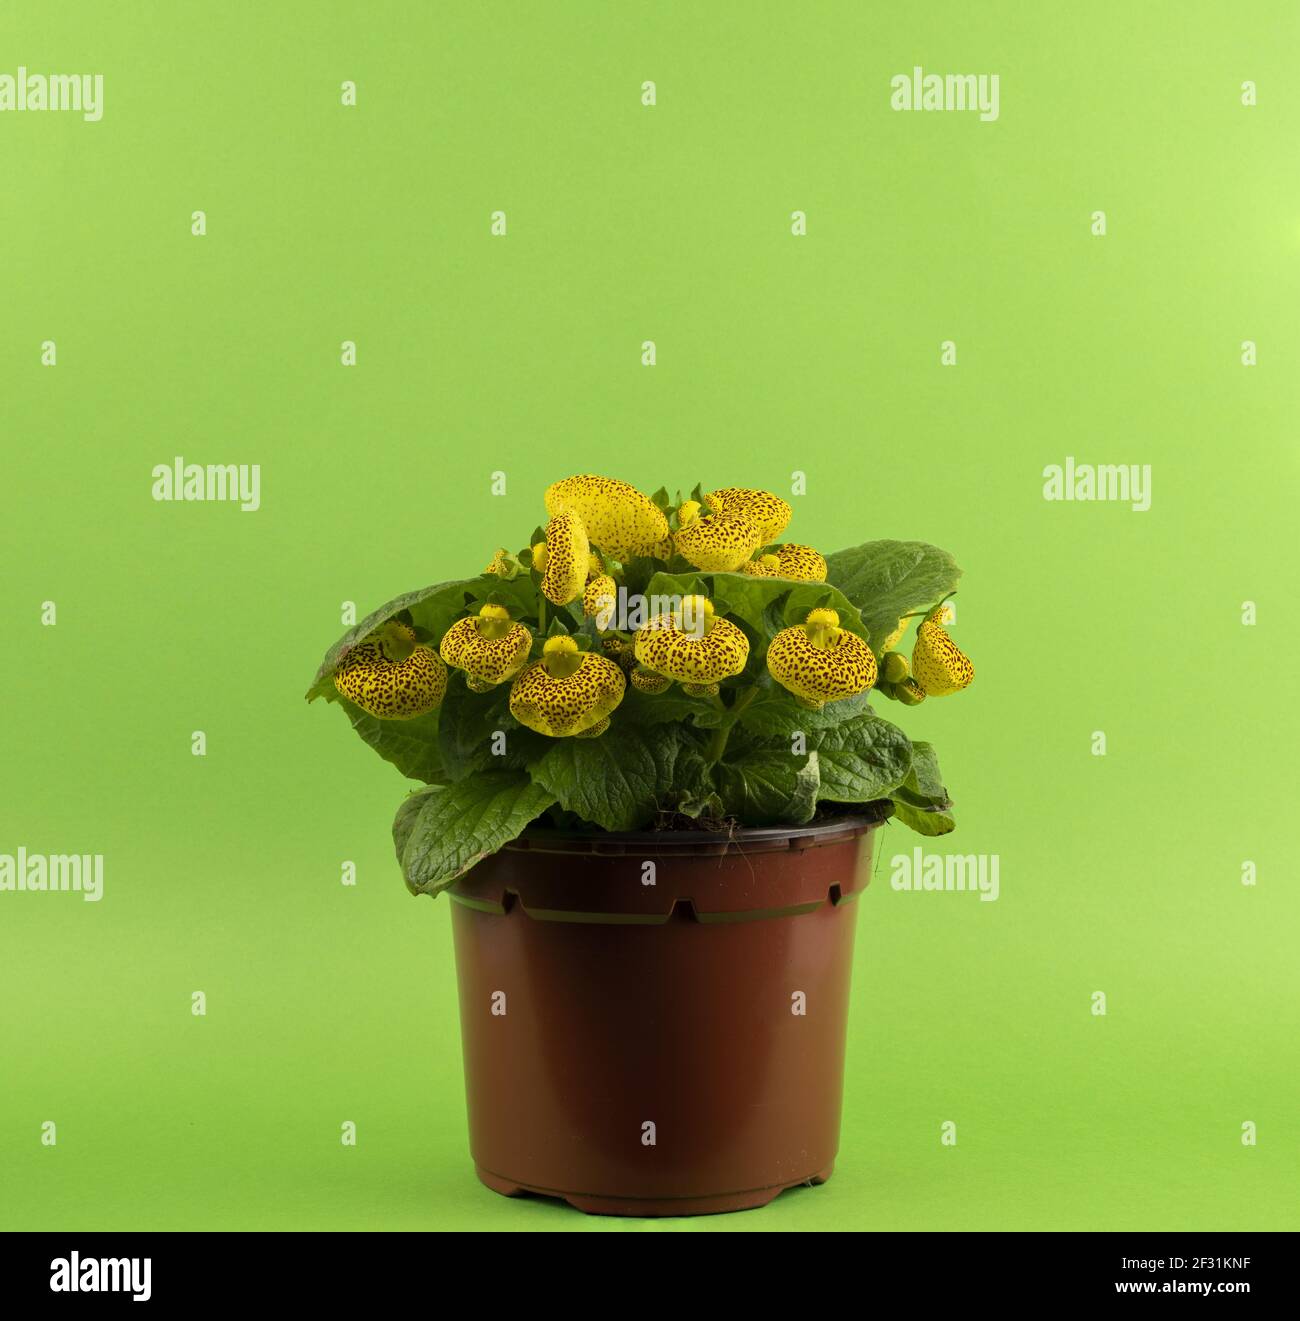 calceolaria integrifolia in pot with green background Stock Photo